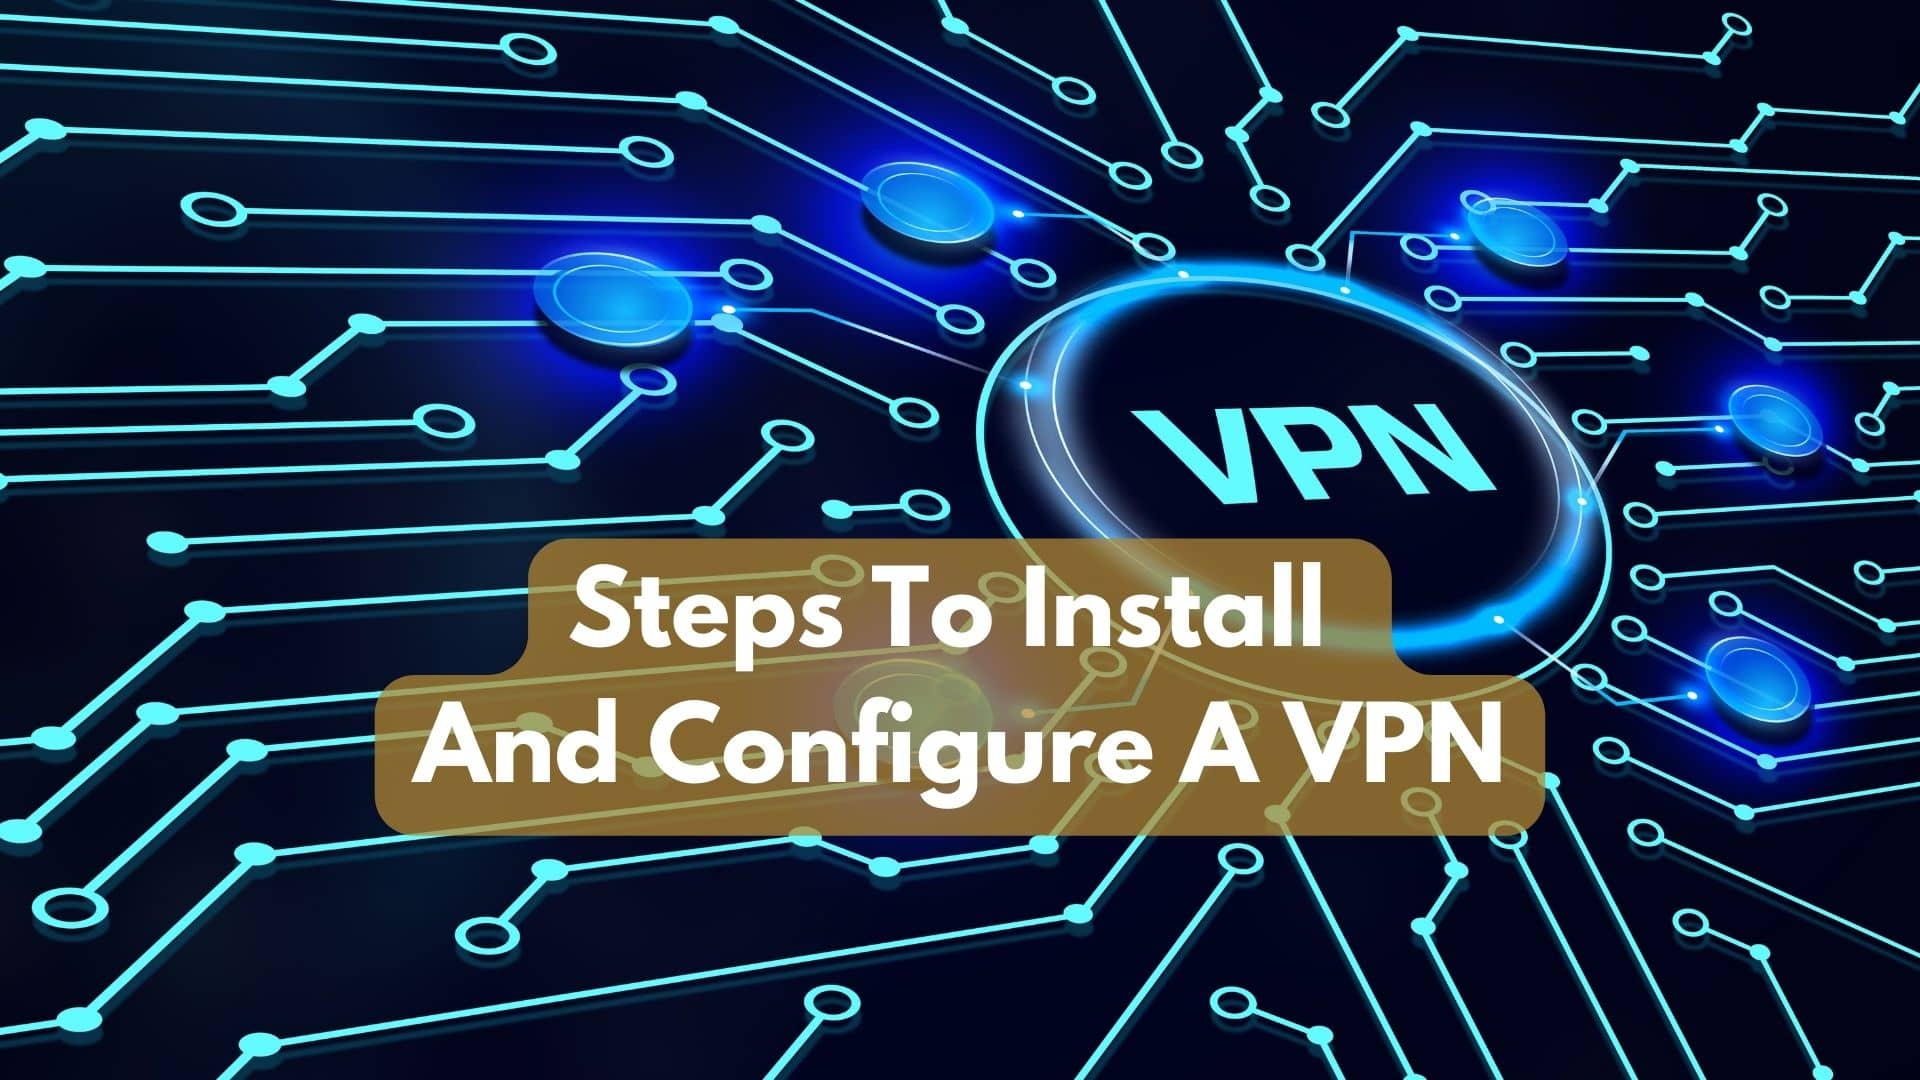 What Are The Steps To Install And Configure A VPN?